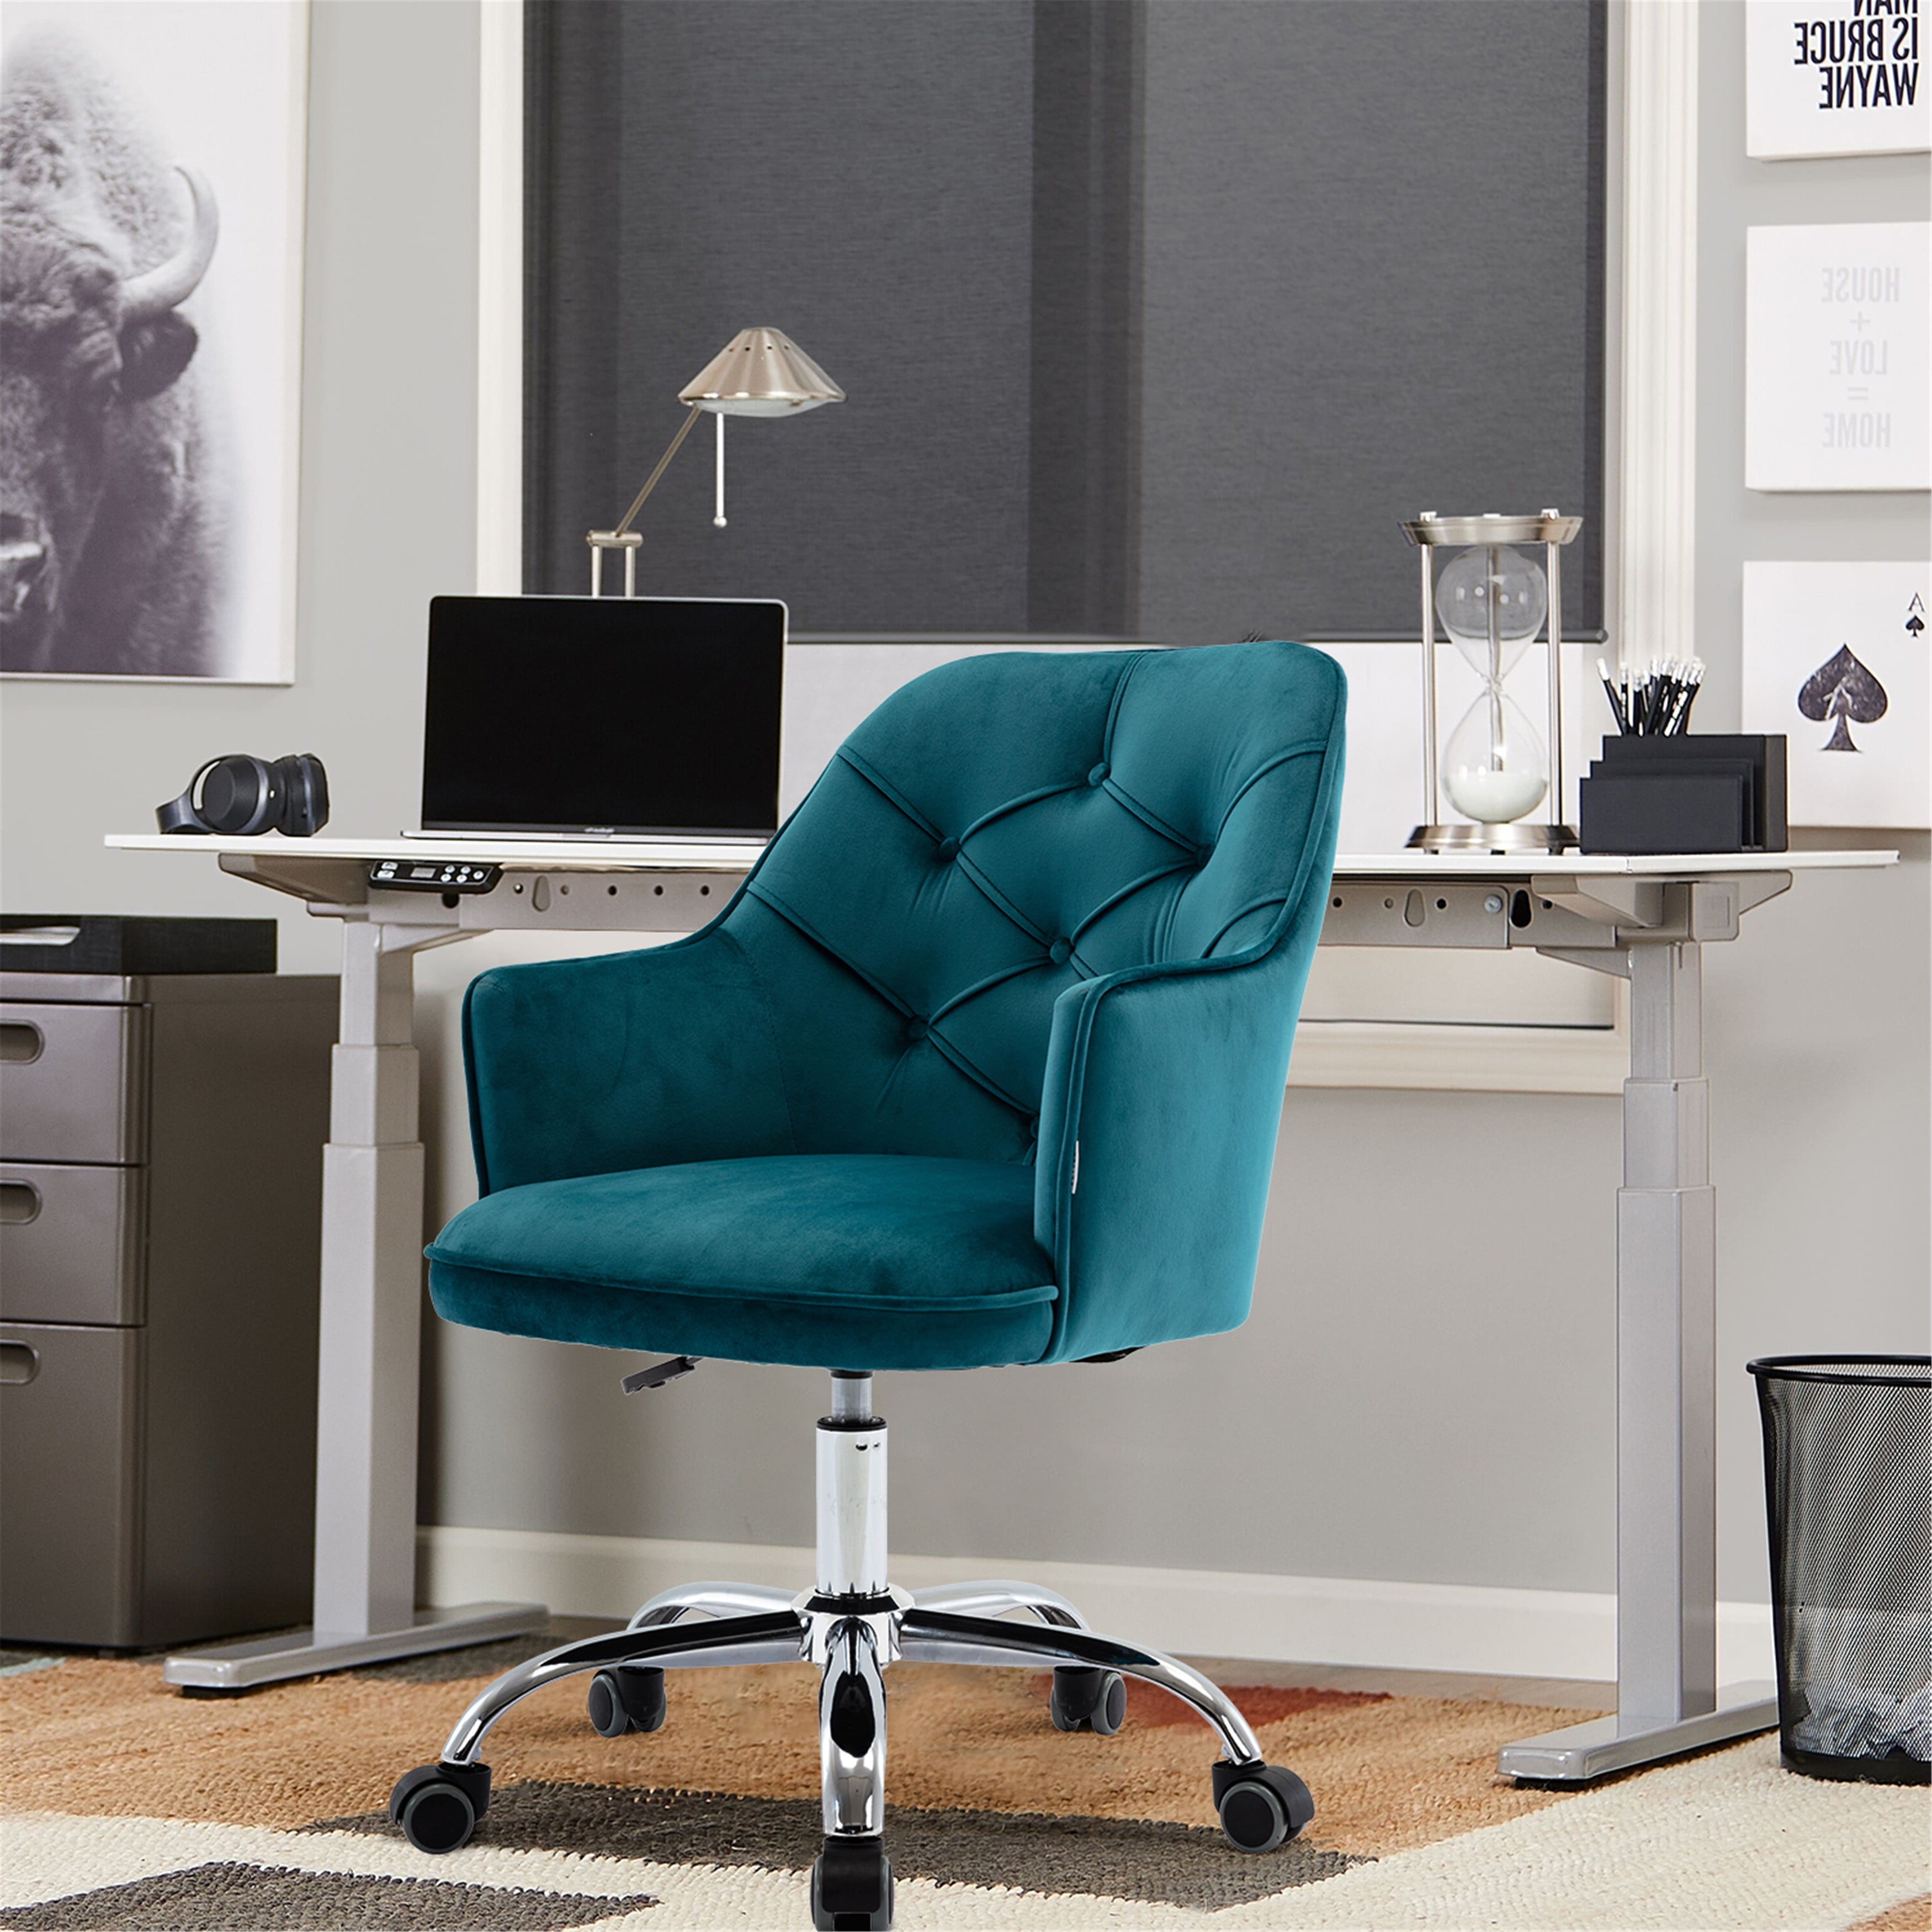 Details about   Office Chairs Swivel Velvet Tufted Height Adjustable Living Room Desk Chair Blue 